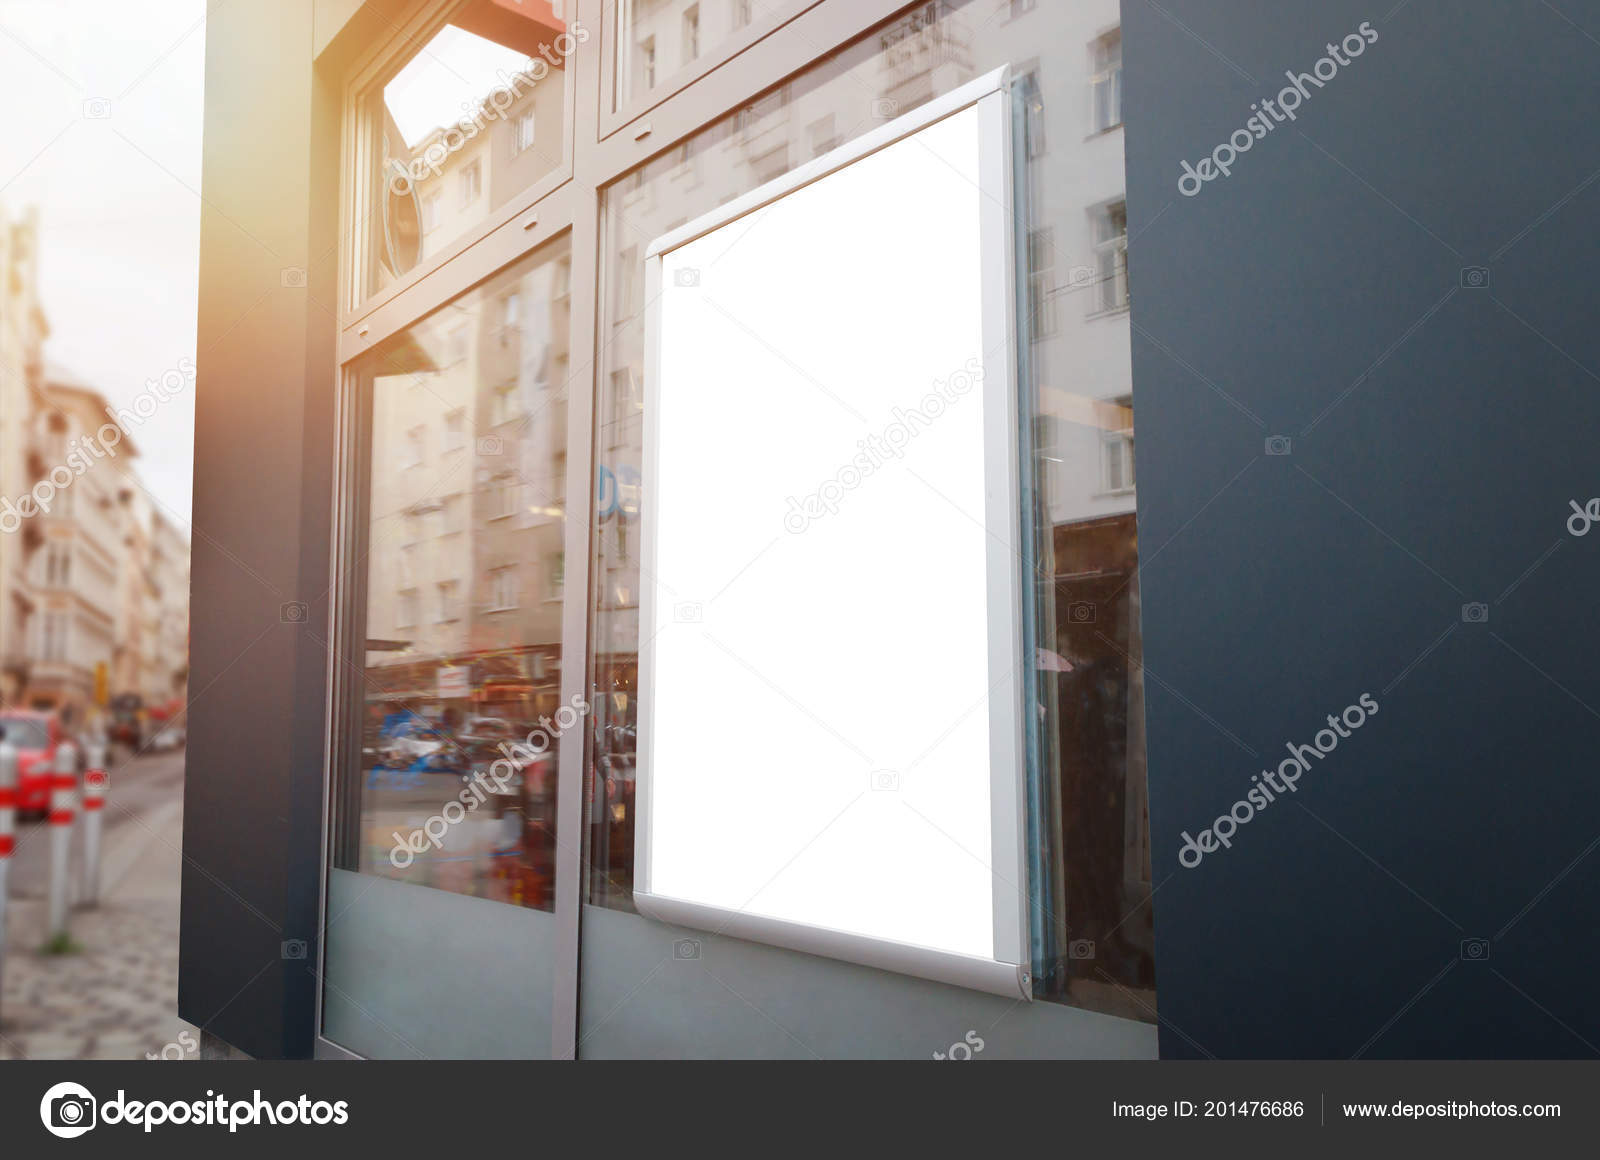 Download Poster Frame Mockup Window Store City Street Stock Photo Image By C Vlado85 201476686